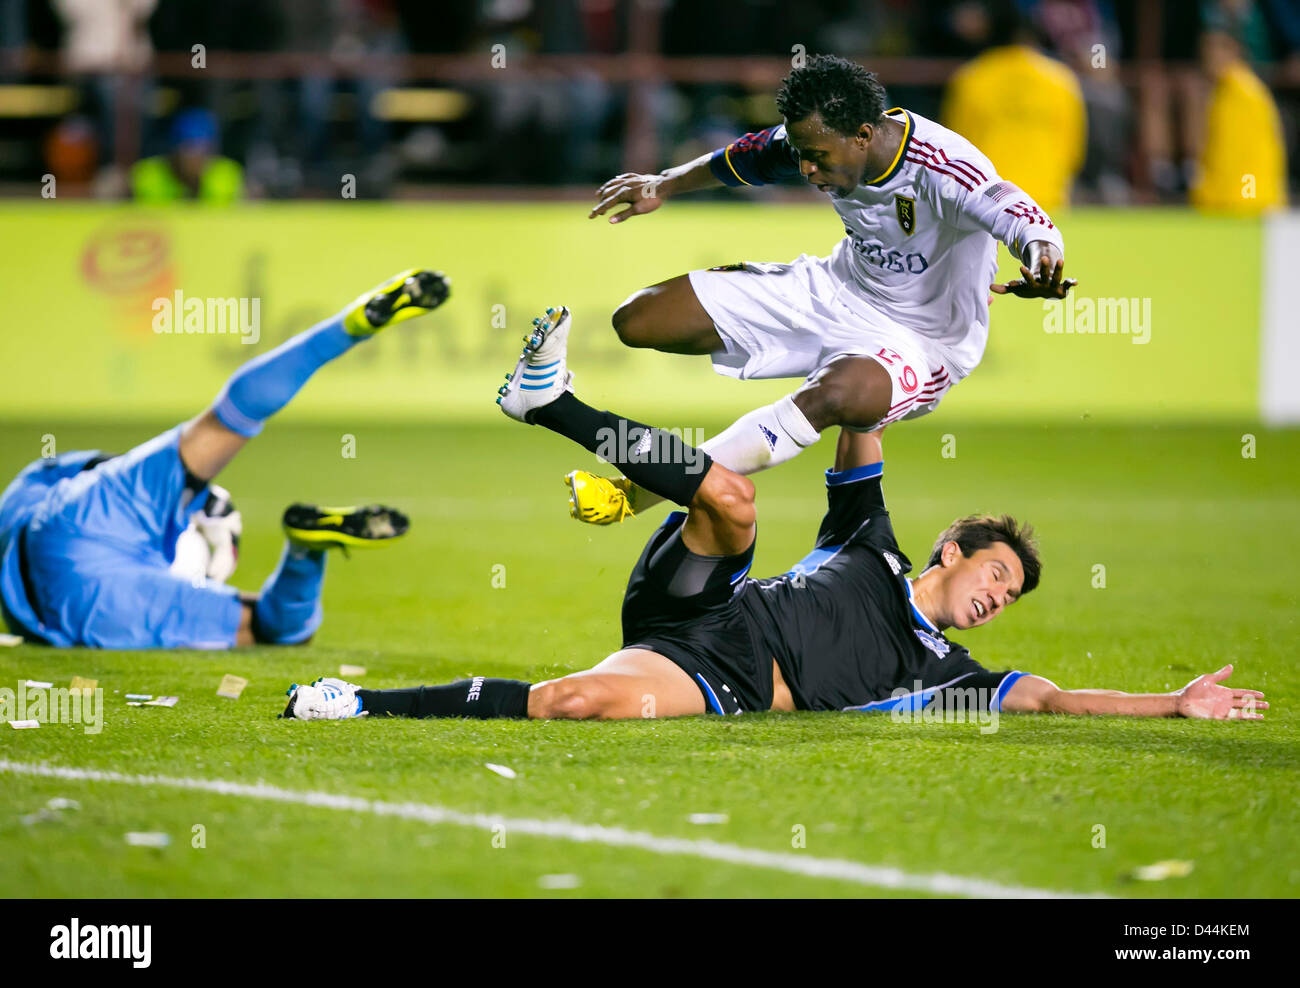 March 3, 2013: San Jose Earthquakes midfielder Shea Salinas (6) has his shot blocked while Real Salt Lake defender Kenny Mansally (29) leaps over him during the MLS game between the Real Salt Lake and the San Jose Earthquakes at Buck Shaw Stadium in Santa Clara CA. Real Salt Lake defeated San Jose 2-0. Stock Photo